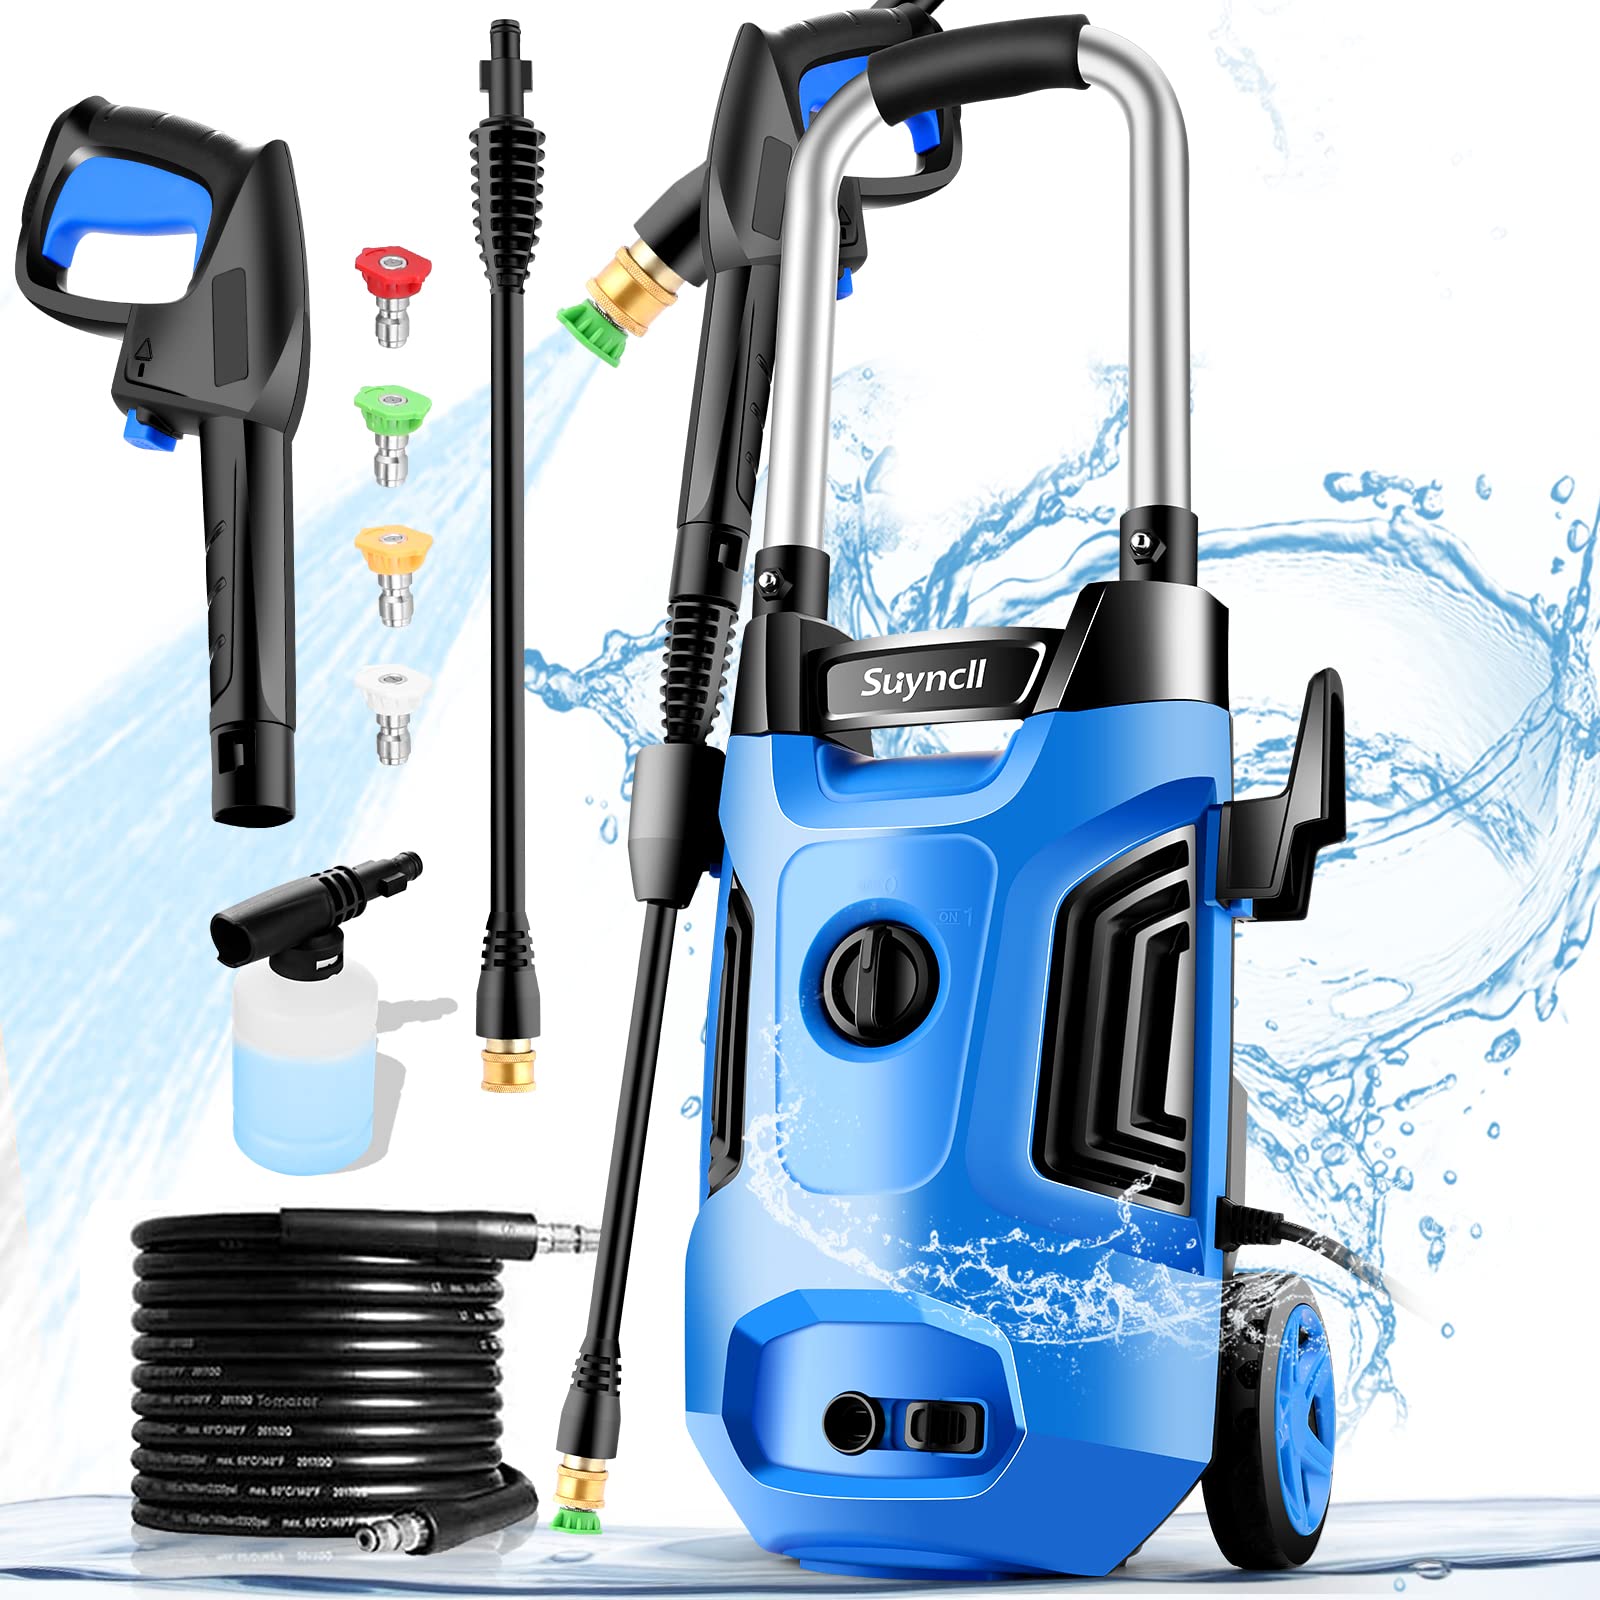 Suyncll Electric Pressure Washer Powered, 2.5 GPM Power Washer 1800W High Pressure Car Cleaner with 4 Nozzles, 20 Ft Hose & 35 Ft Wire, CSA Compliant, Blue